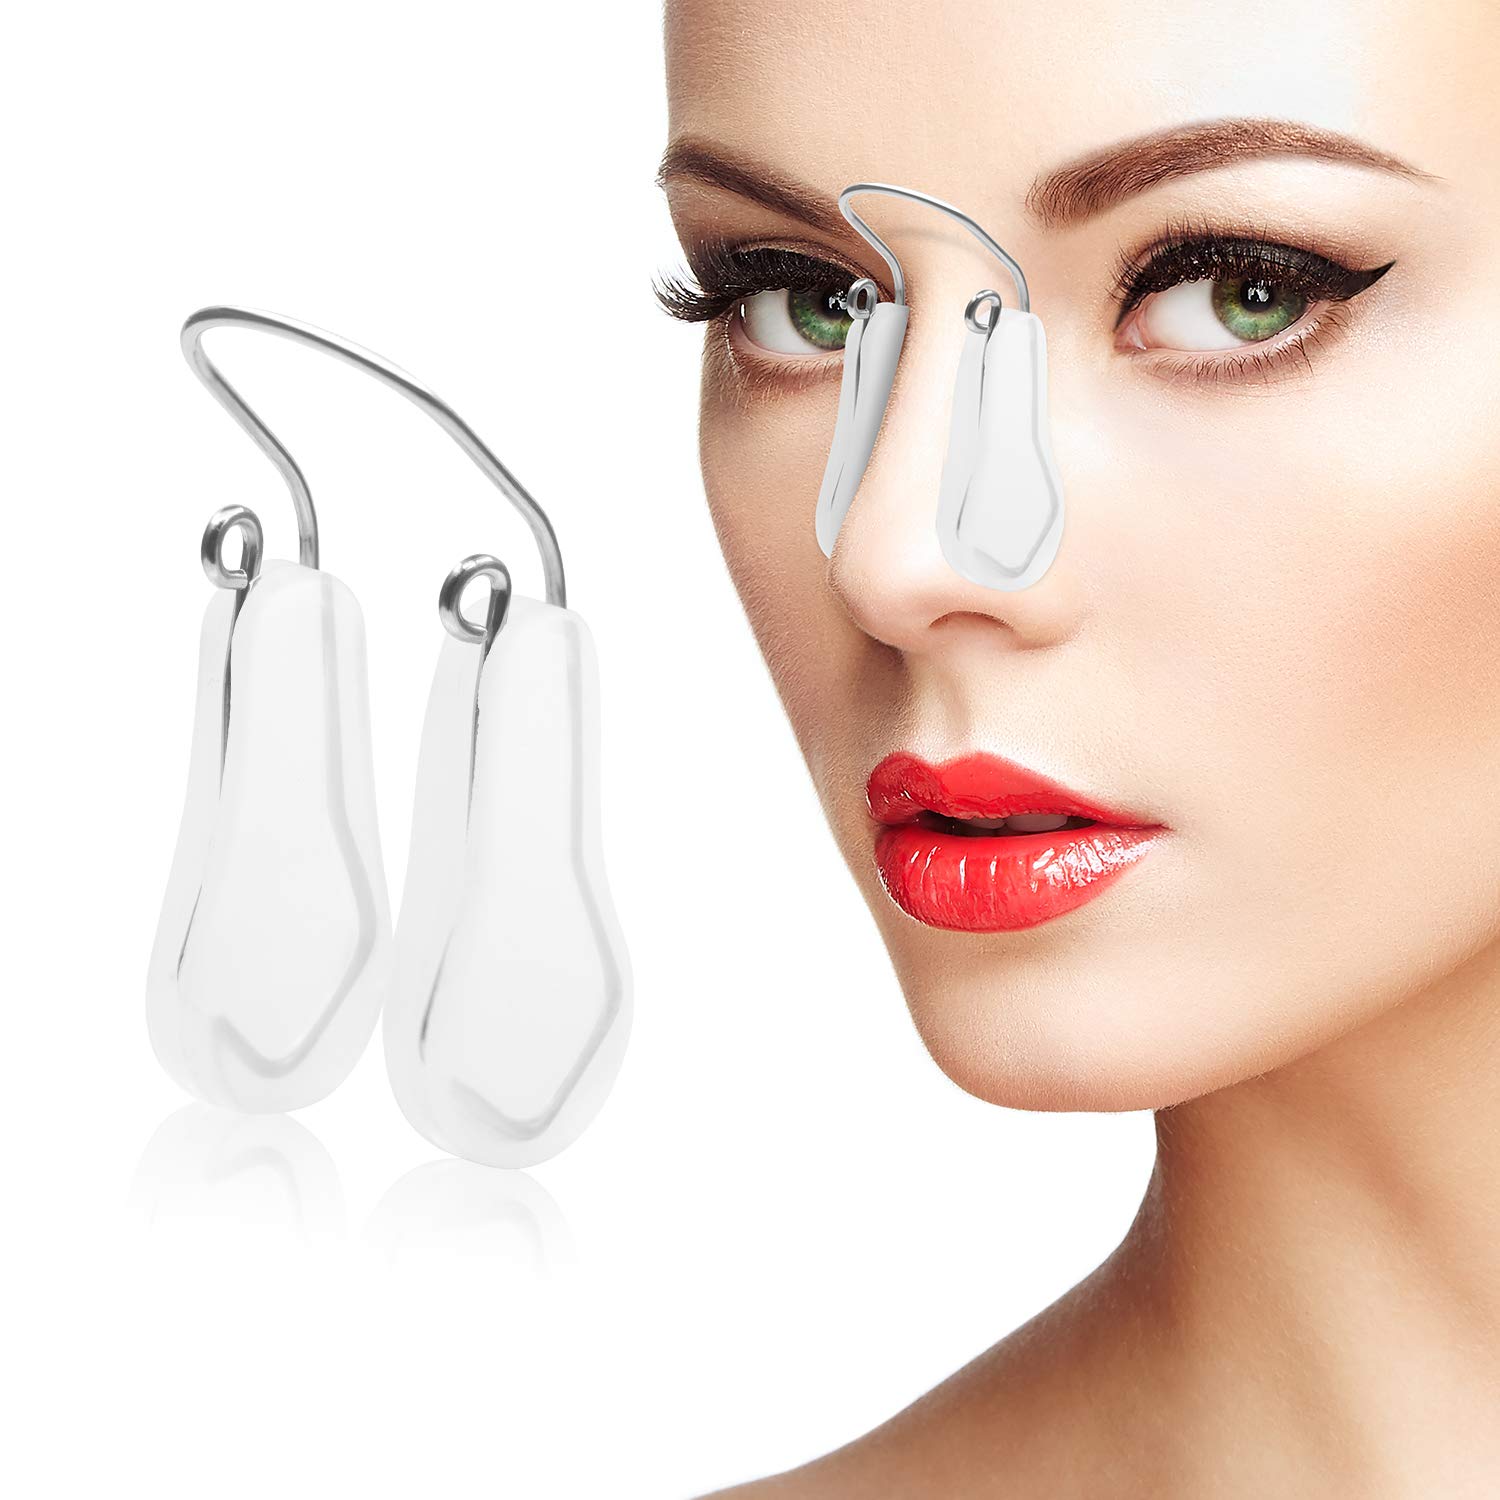 Nose Shaper - Safe Nose Lifter Soft Silicone Clip and Oil